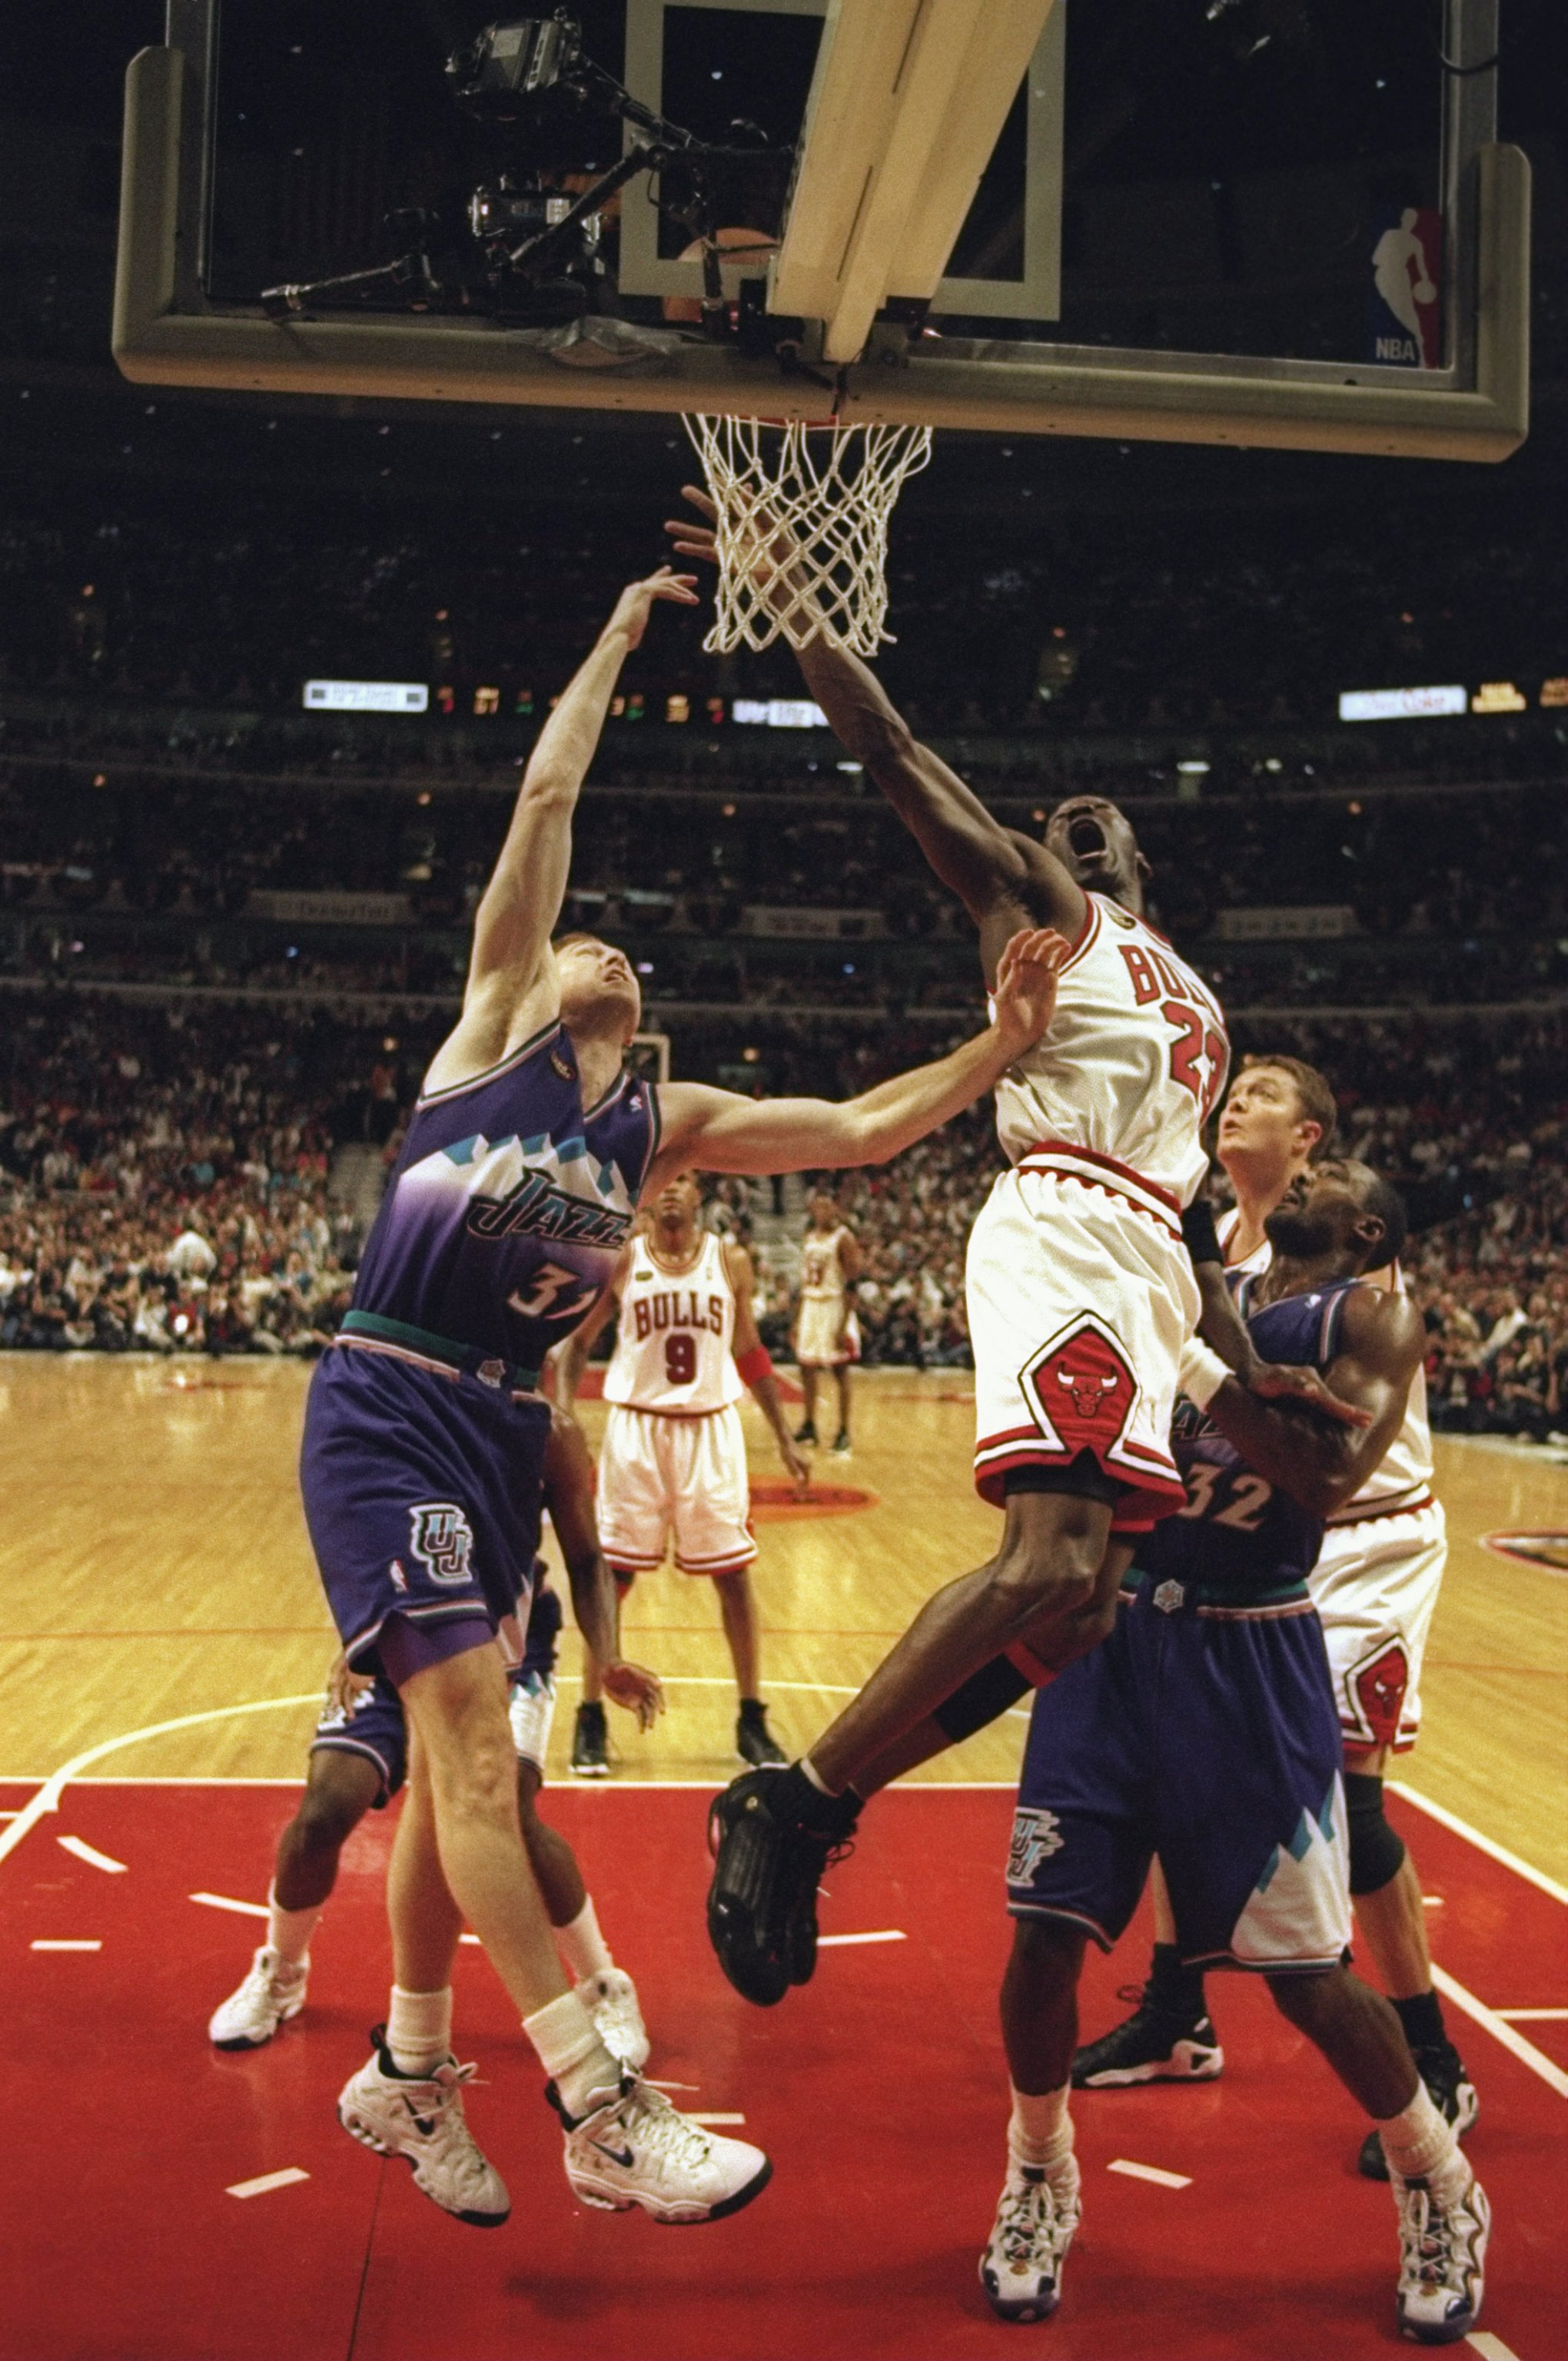 7 Jun 1998:  Michael Jordan #23 of the Chicago Bulls goes up for a shot as Adam Keefe #31 and Karl Malone #32 of the Utah Jazz try to stop him during the NBA Finals game 3 at the United Center in Chicago, Illinois.  The Bulls defeated the Jazz 96-54. Mand